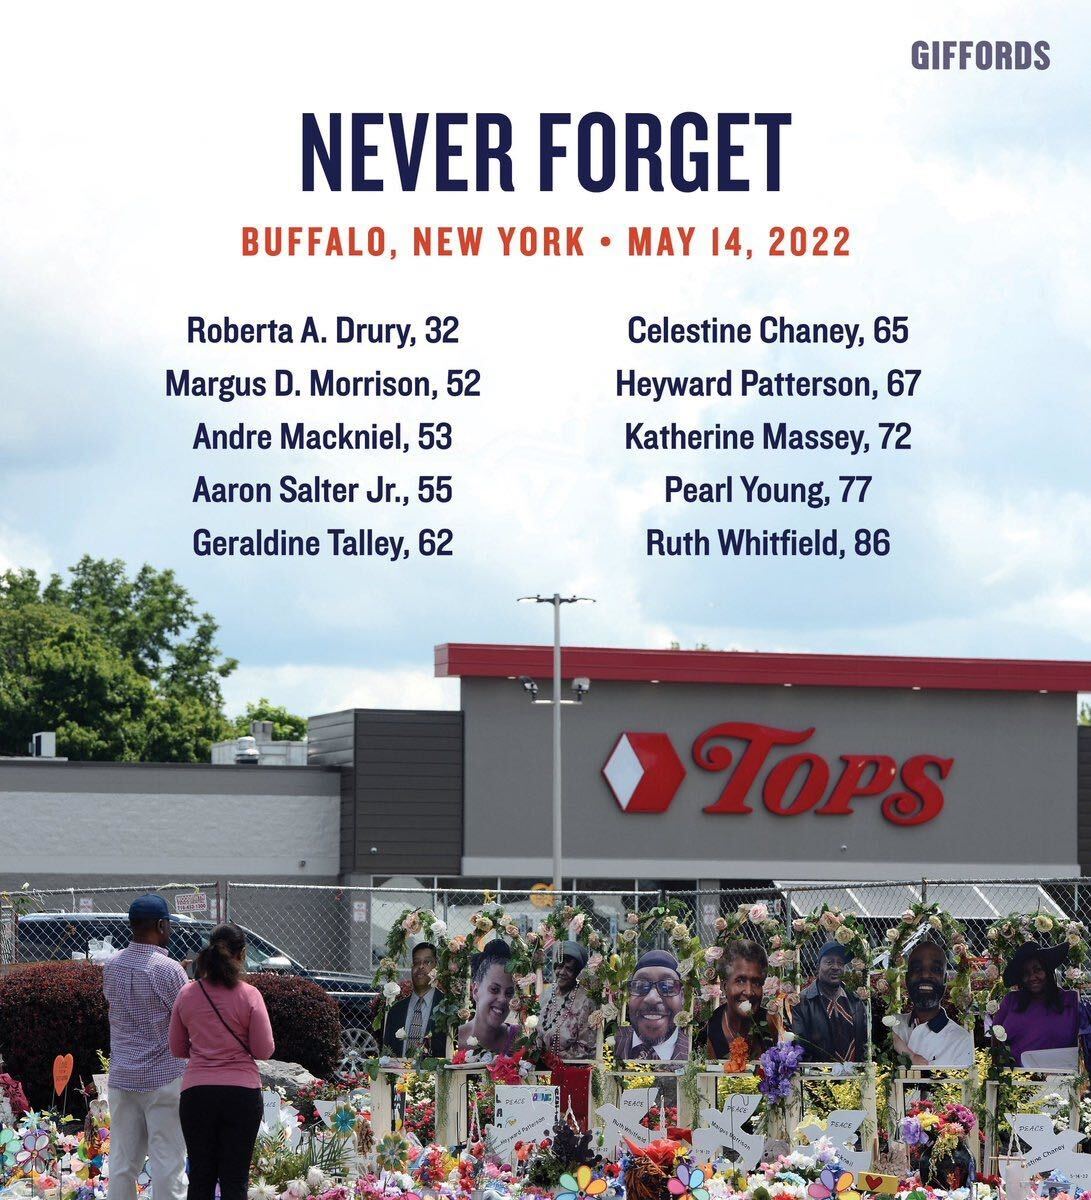 Two years ago, ten people went grocery shopping in Buffalo, NY, and never made it home to their families. They were shot and killed in a racist attack by a gunman who was radicalized online. Three others were shot and injured. We make it far too easy for people fueled by racist